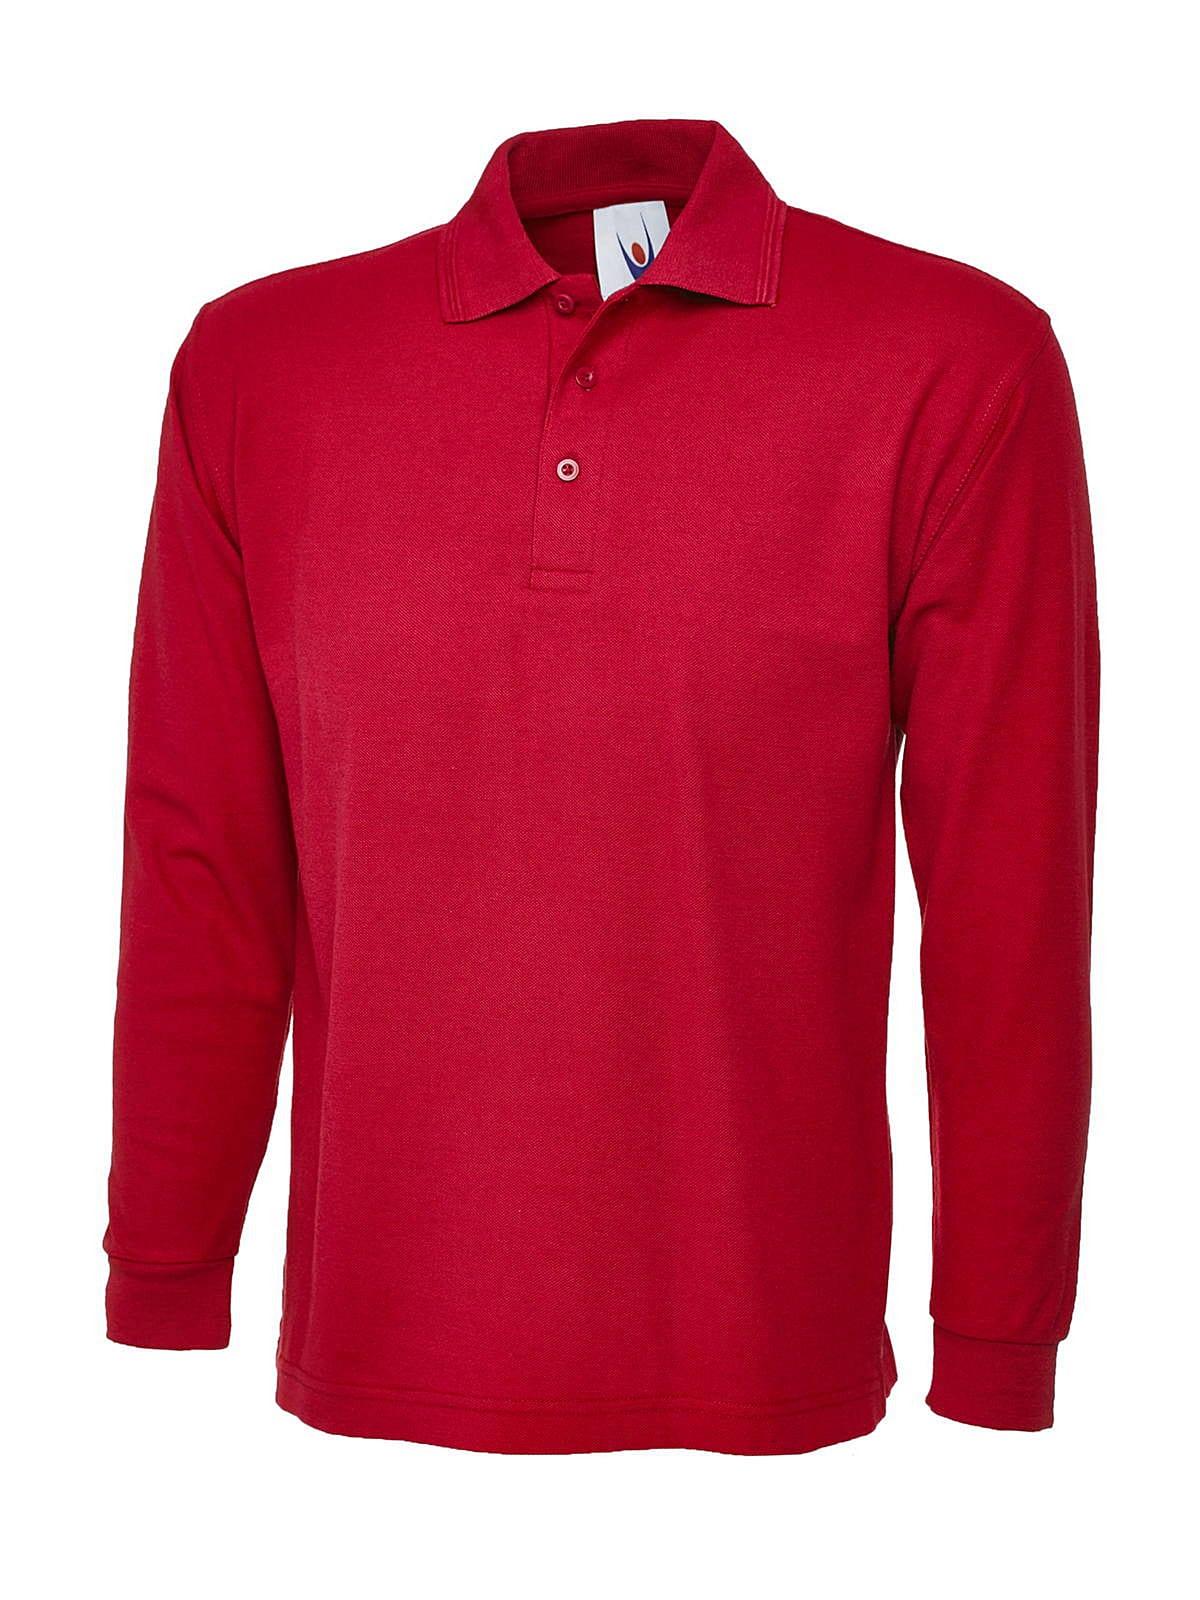 Uneek 220GSM Long-Sleeve Polo Shirt in Red (Product Code: UC113)